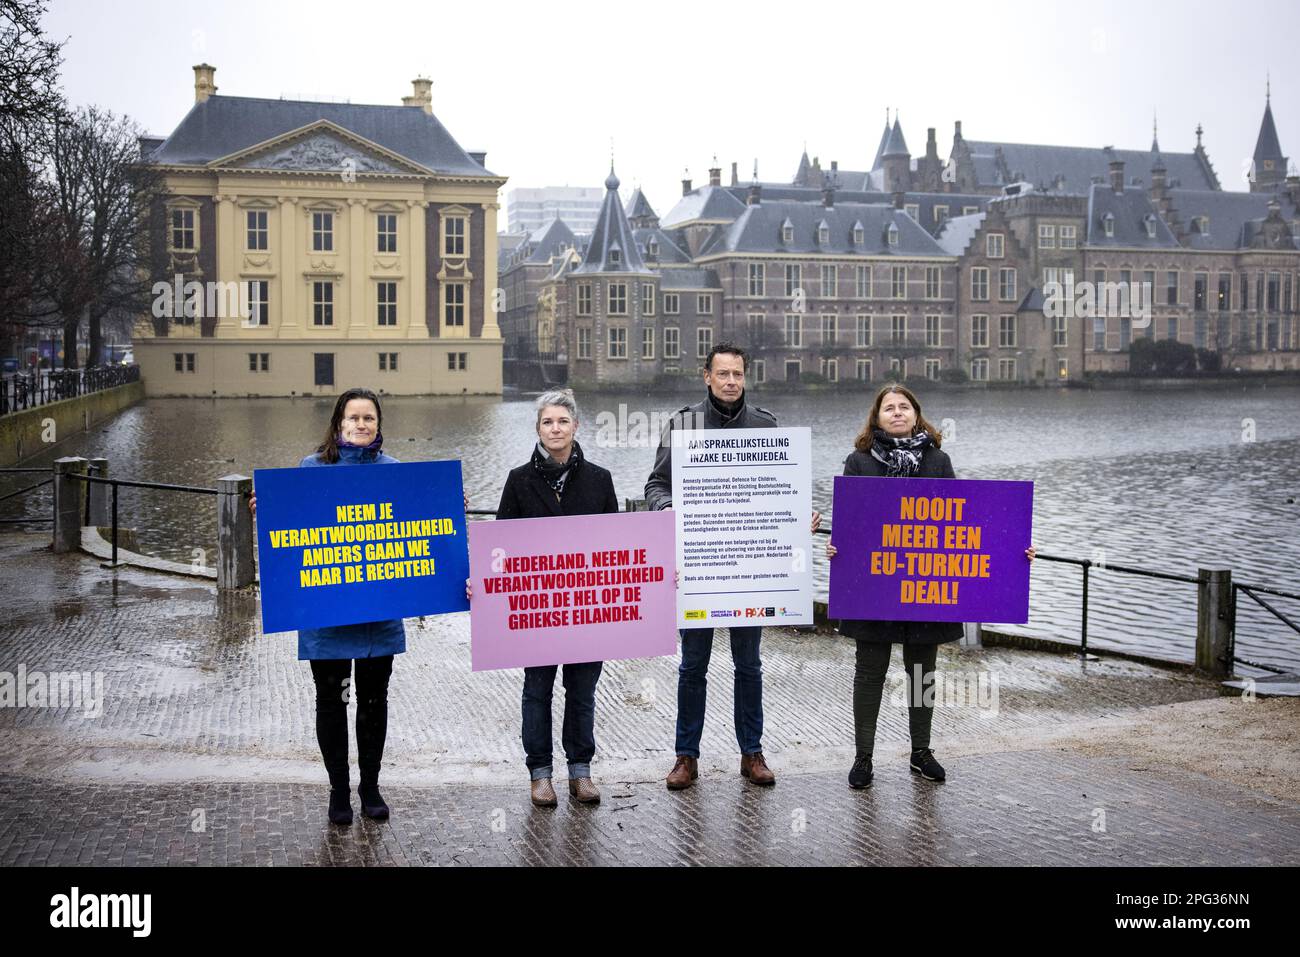 THE HAGUE - Members of Amnesty International, peace organization PAX,  Defense for Children and Boat Refugee Foundation hold a protest at the  Hofvijver, about human rights violations in Greek refugee camps. The